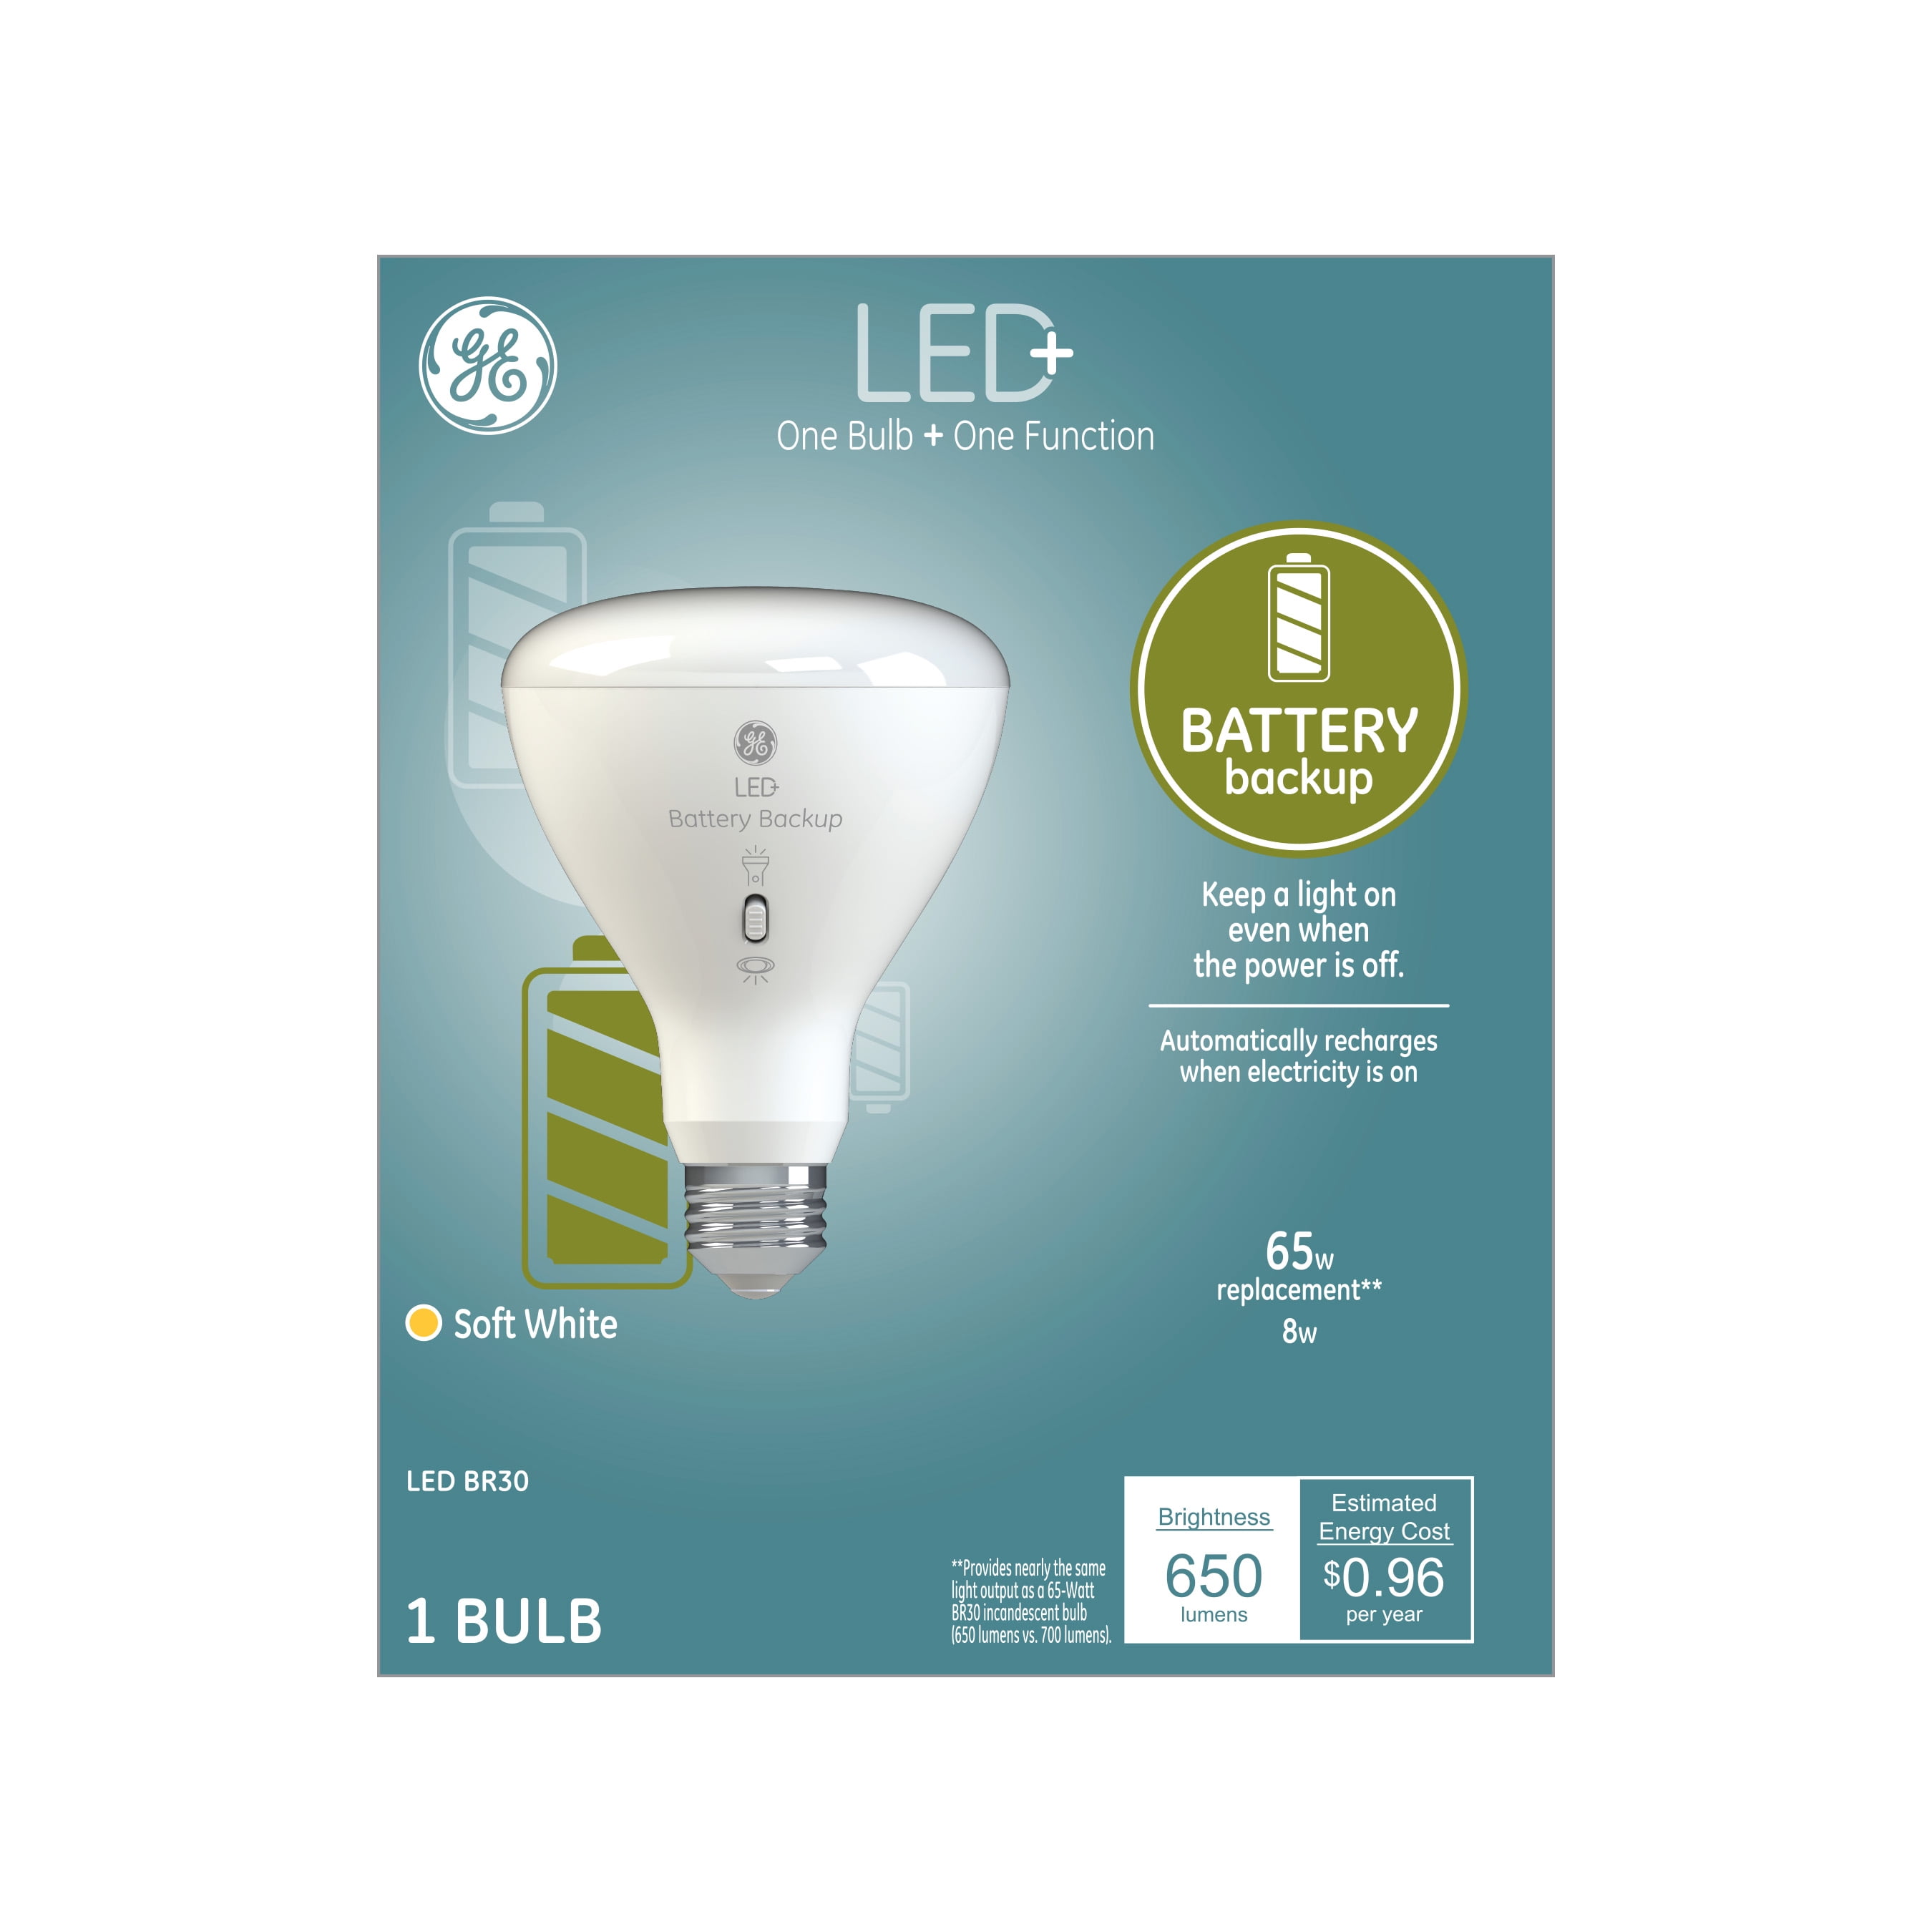 One Bulb GE LED 8w One extra Function Battery Backup A21 